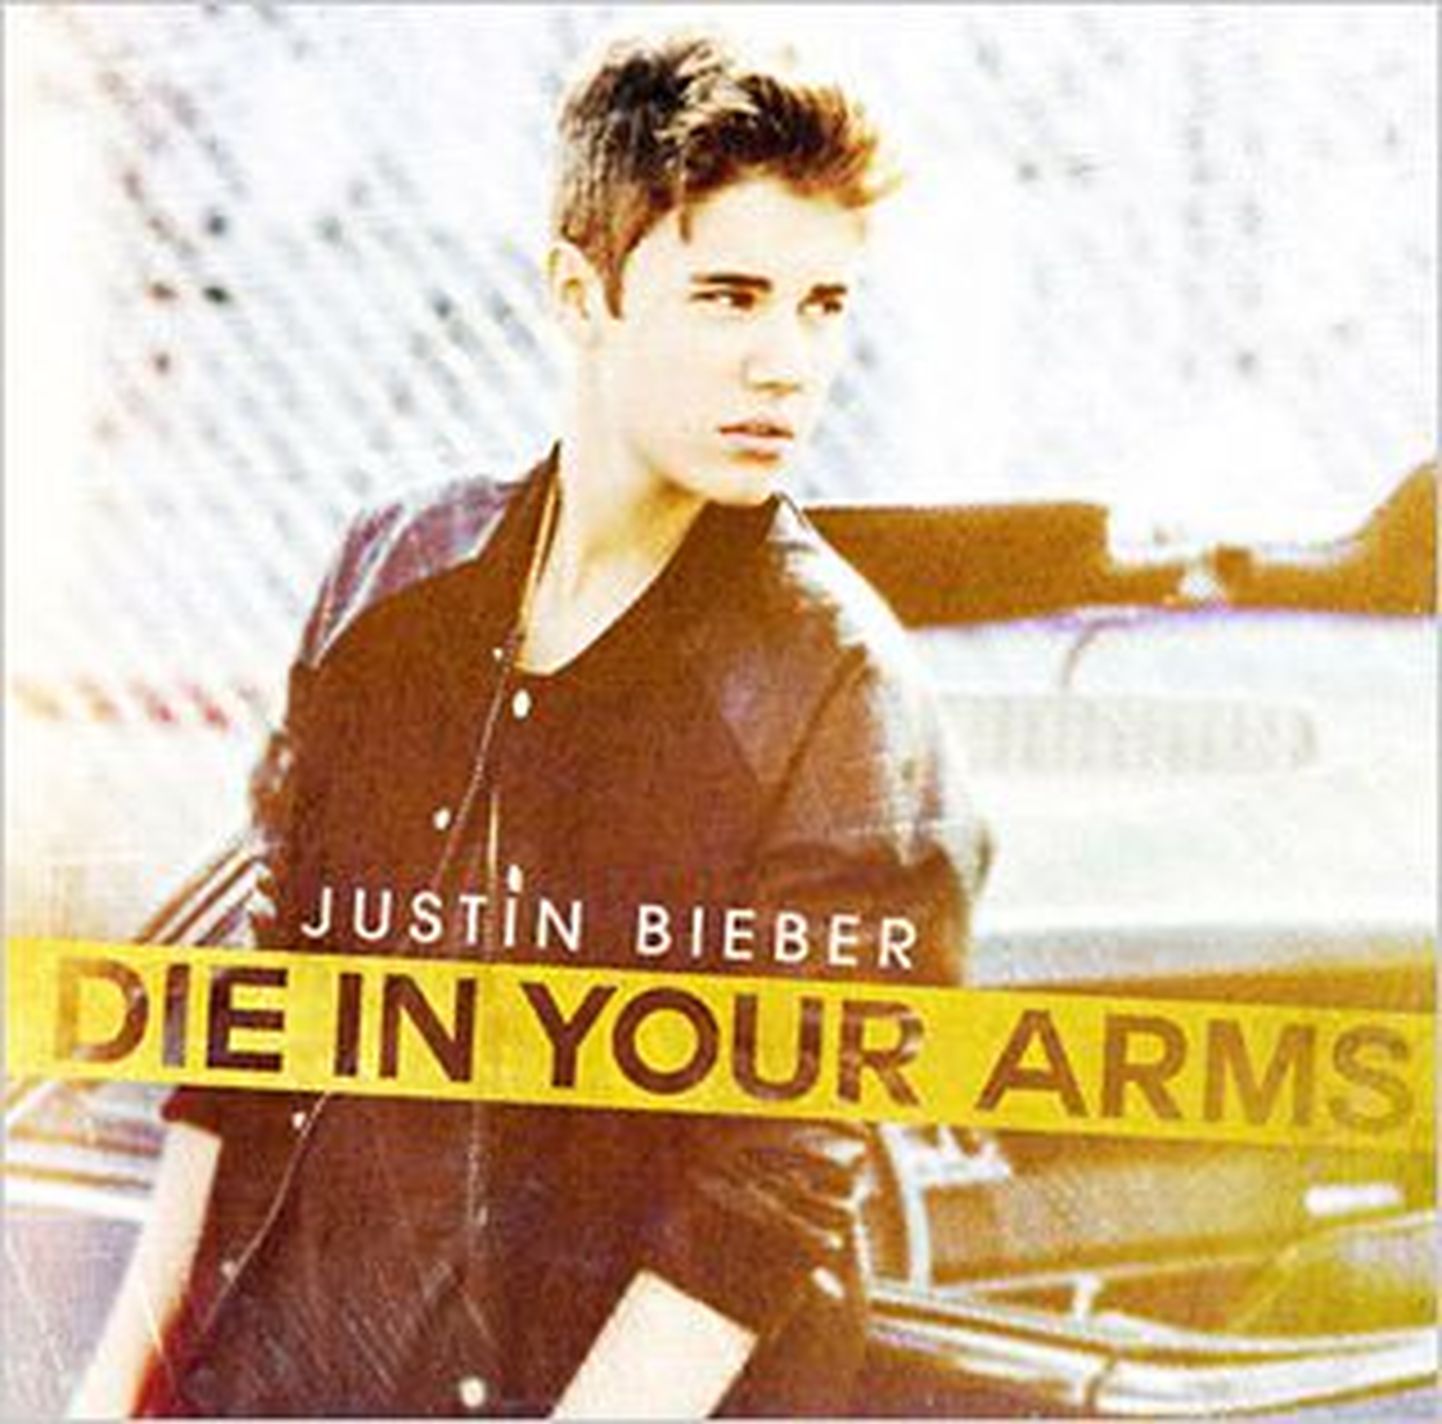 Justin Bieber - Die in your arms